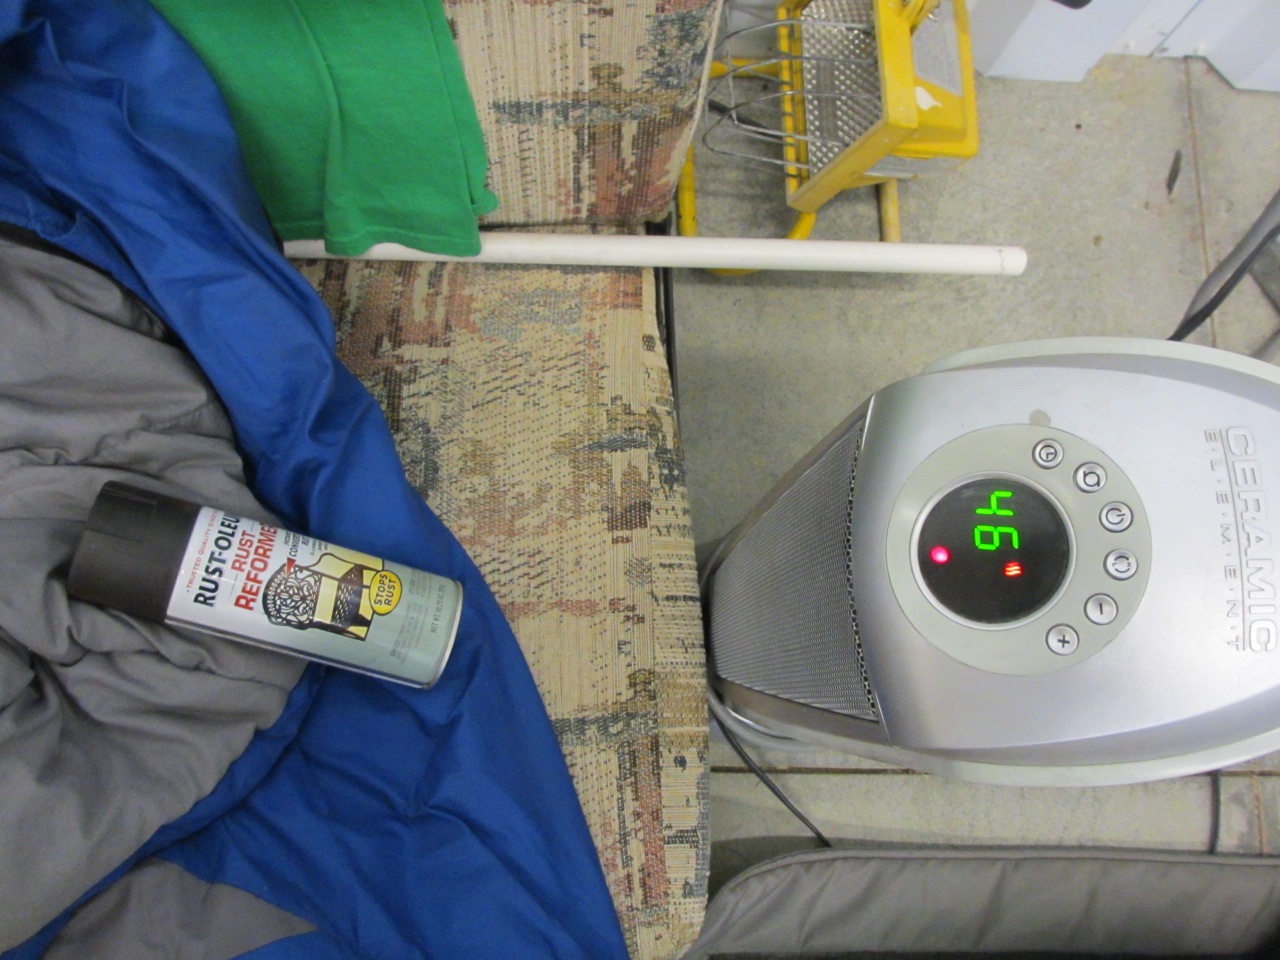  The Rust-Oleum has to be around 55°&nbsp;degrees to use. So we had to warm it up in front of the space heater. 